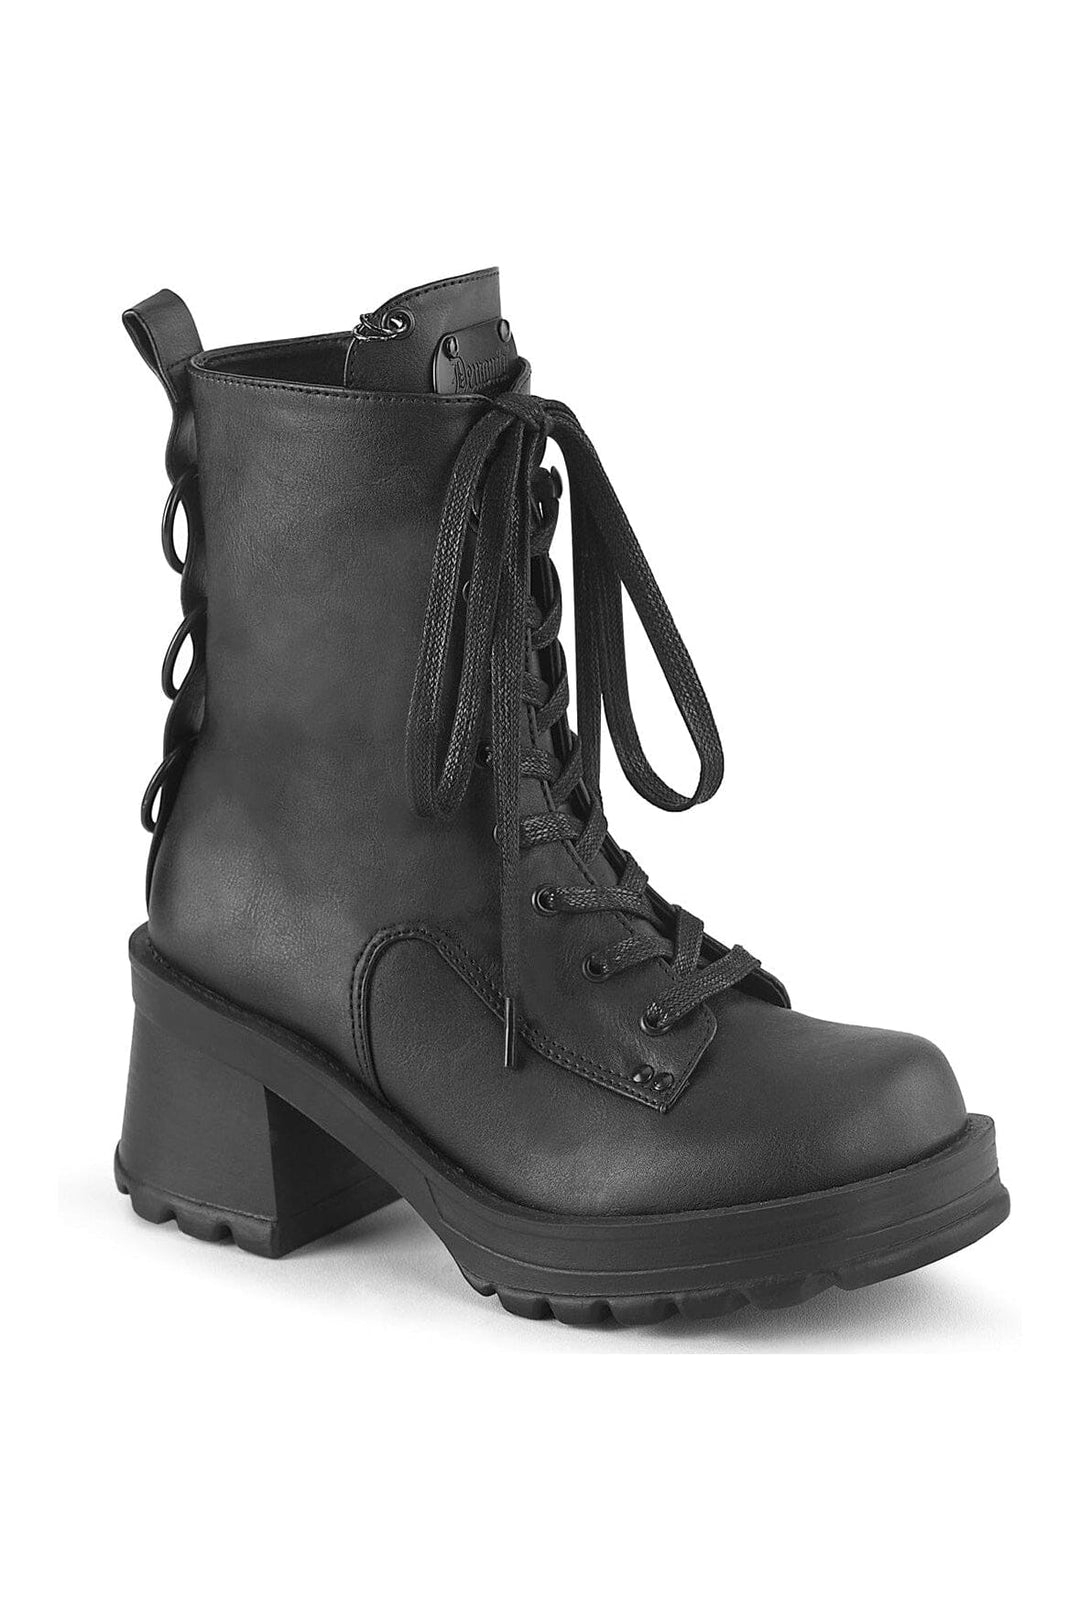 BRATTY-50 Black Vegan Leather Ankle Boot-Ankle Boots-Demonia-Black-10-Vegan Leather-SEXYSHOES.COM